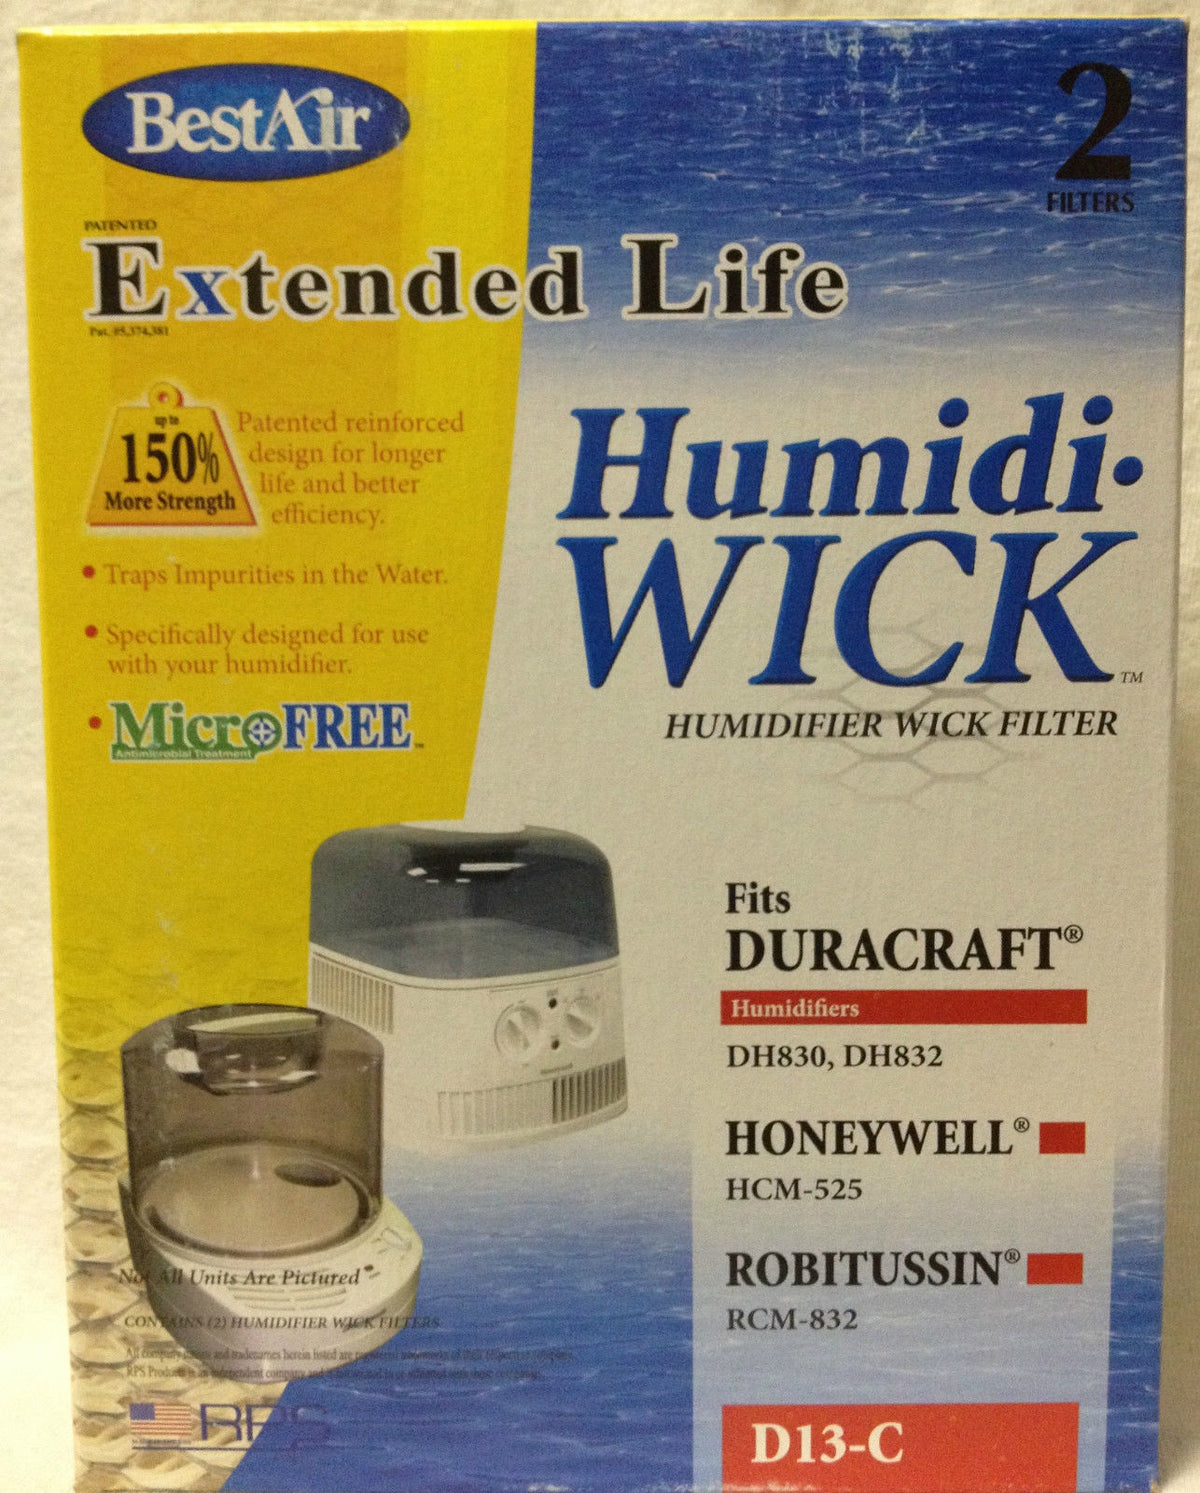 BestAir D13-C Extended Life Humidifier Wick Filter , 3-3/4" x 6" x 1-1/2"